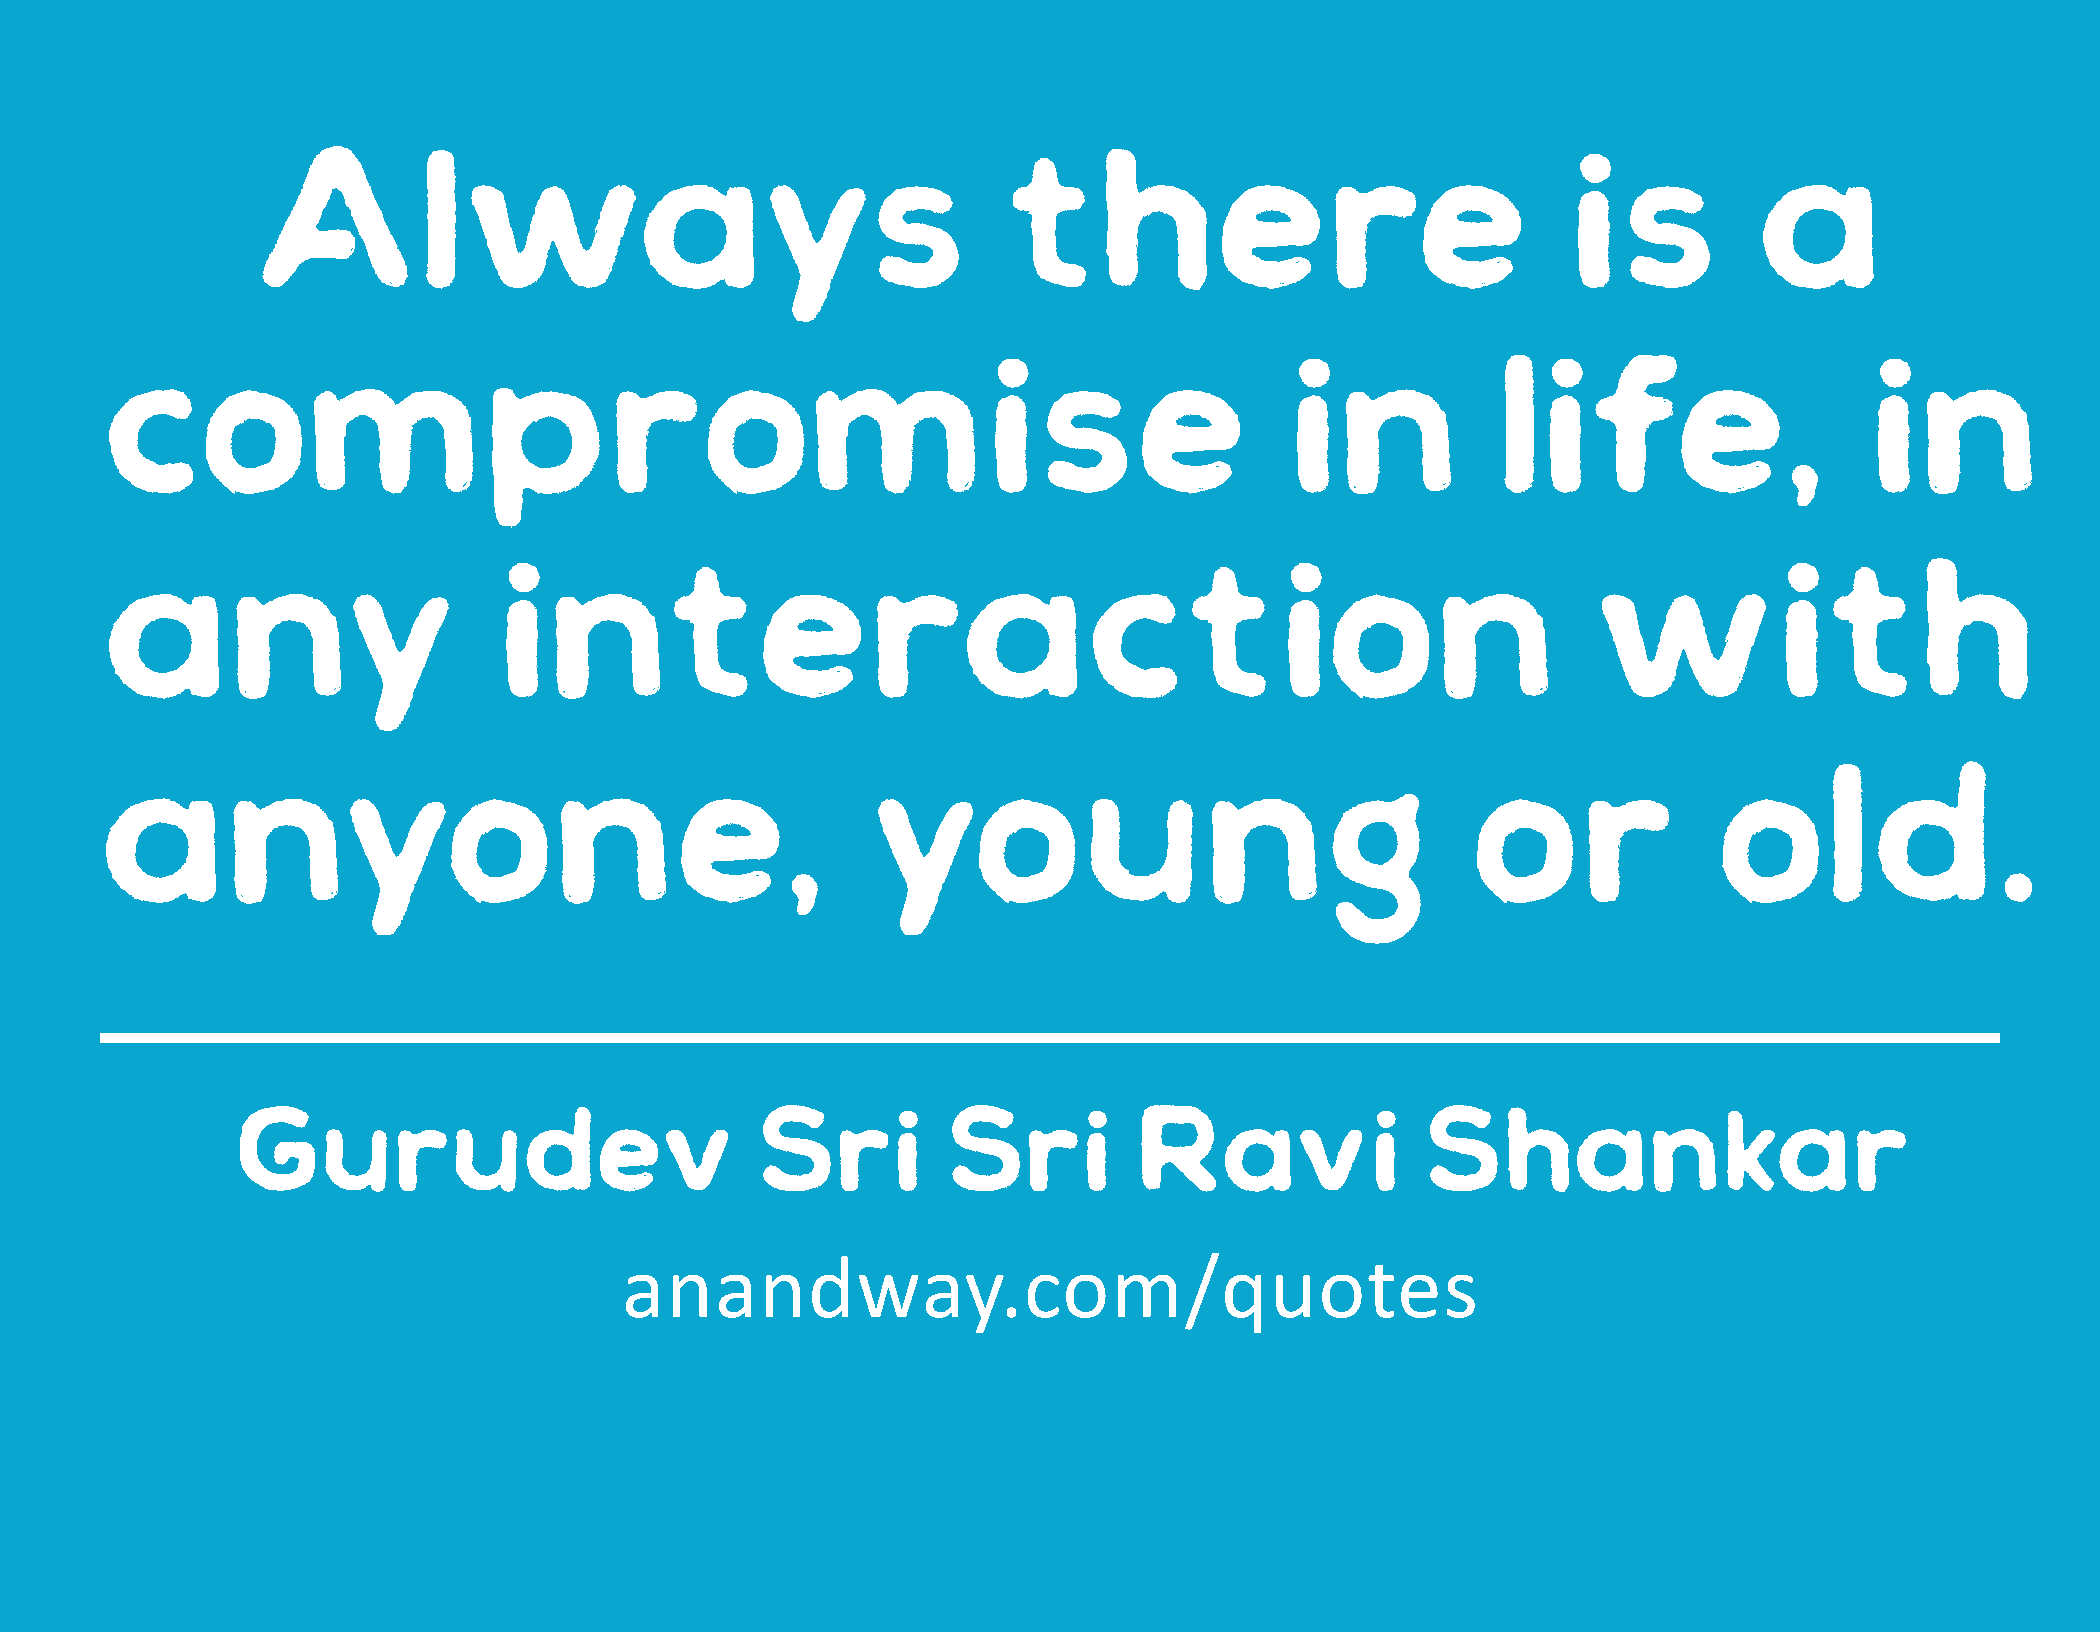 Always there is a compromise in life, in any interaction with anyone, young or old. 
 -Gurudev Sri Sri Ravi Shankar